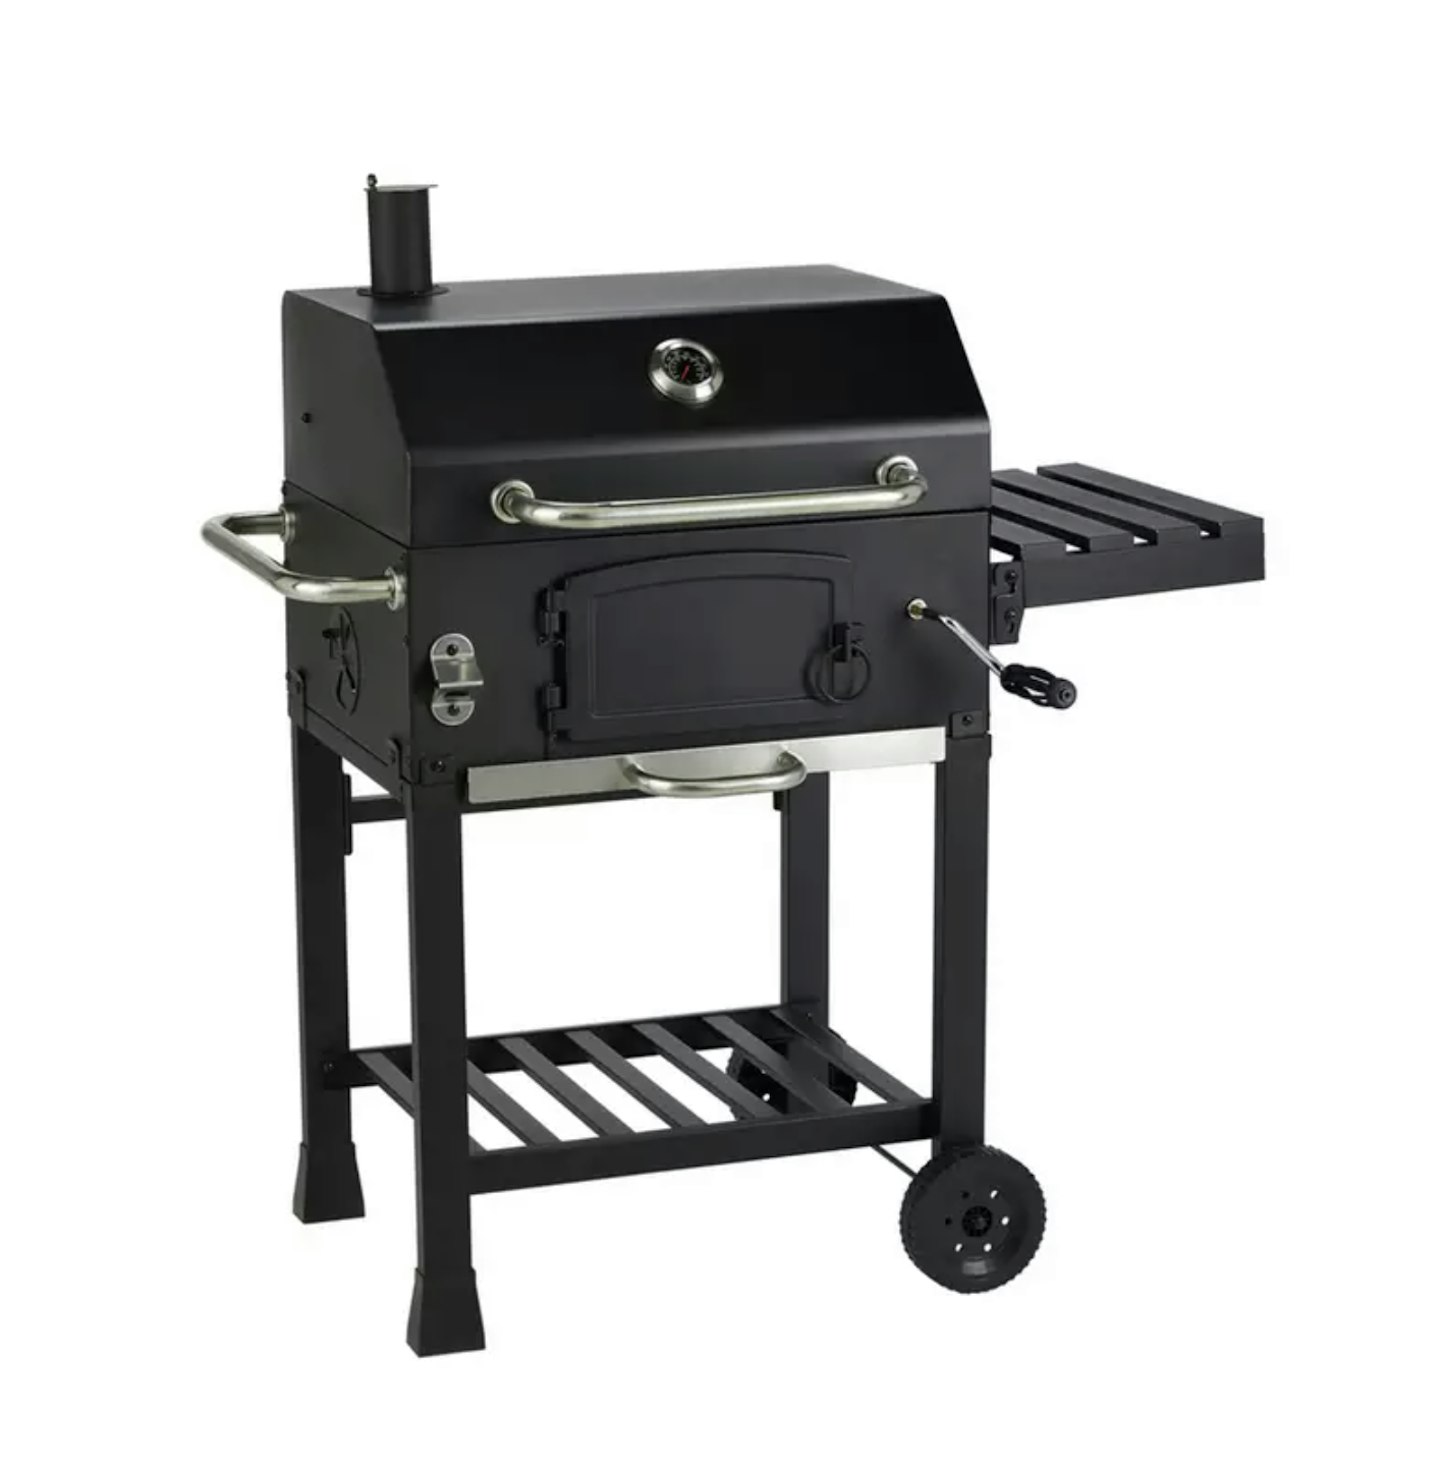 Argos Home American Style Charcoal BBQ